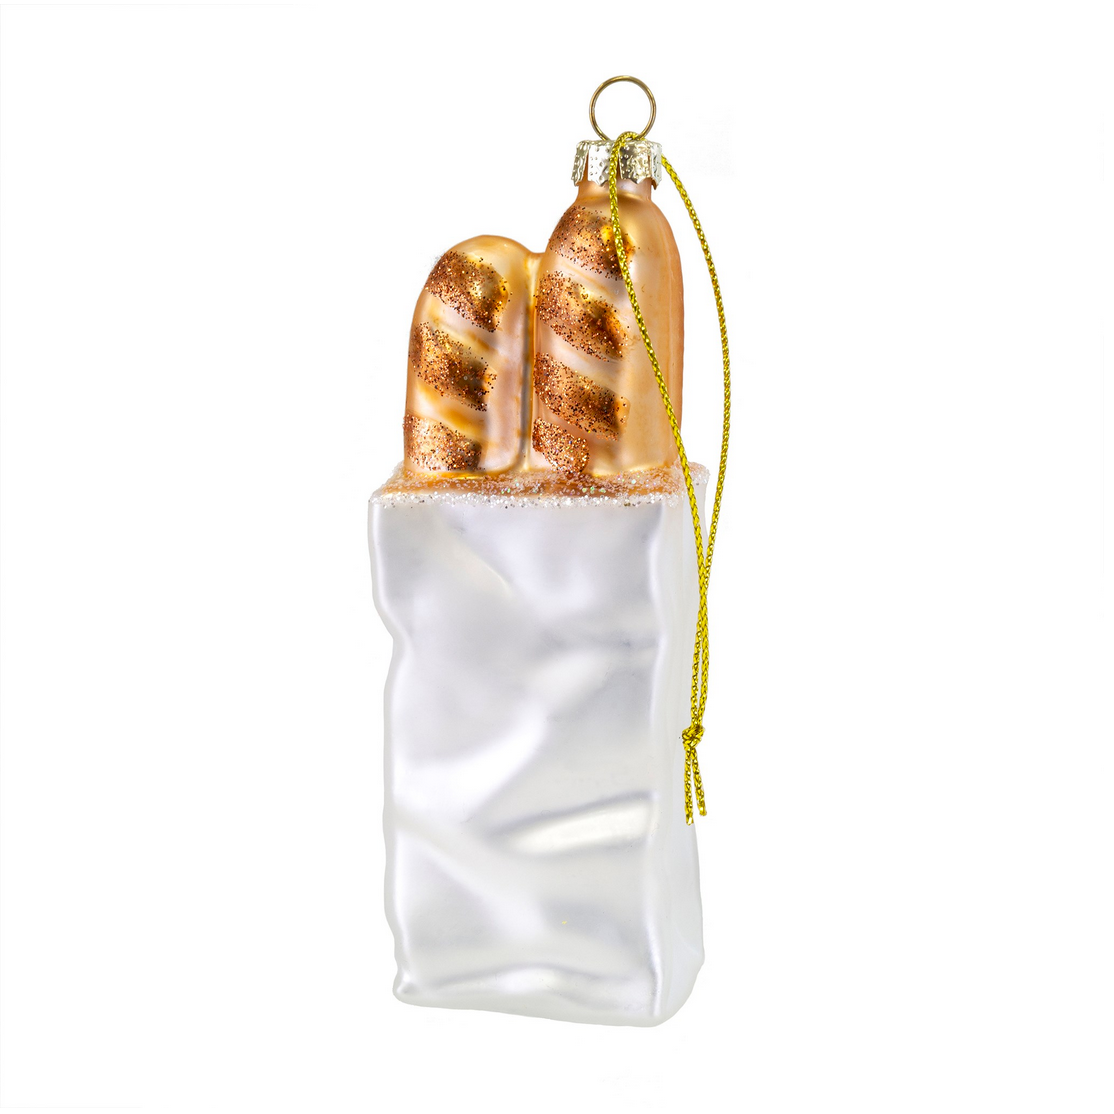 FRENCH BAGUETTE ORNAMENT